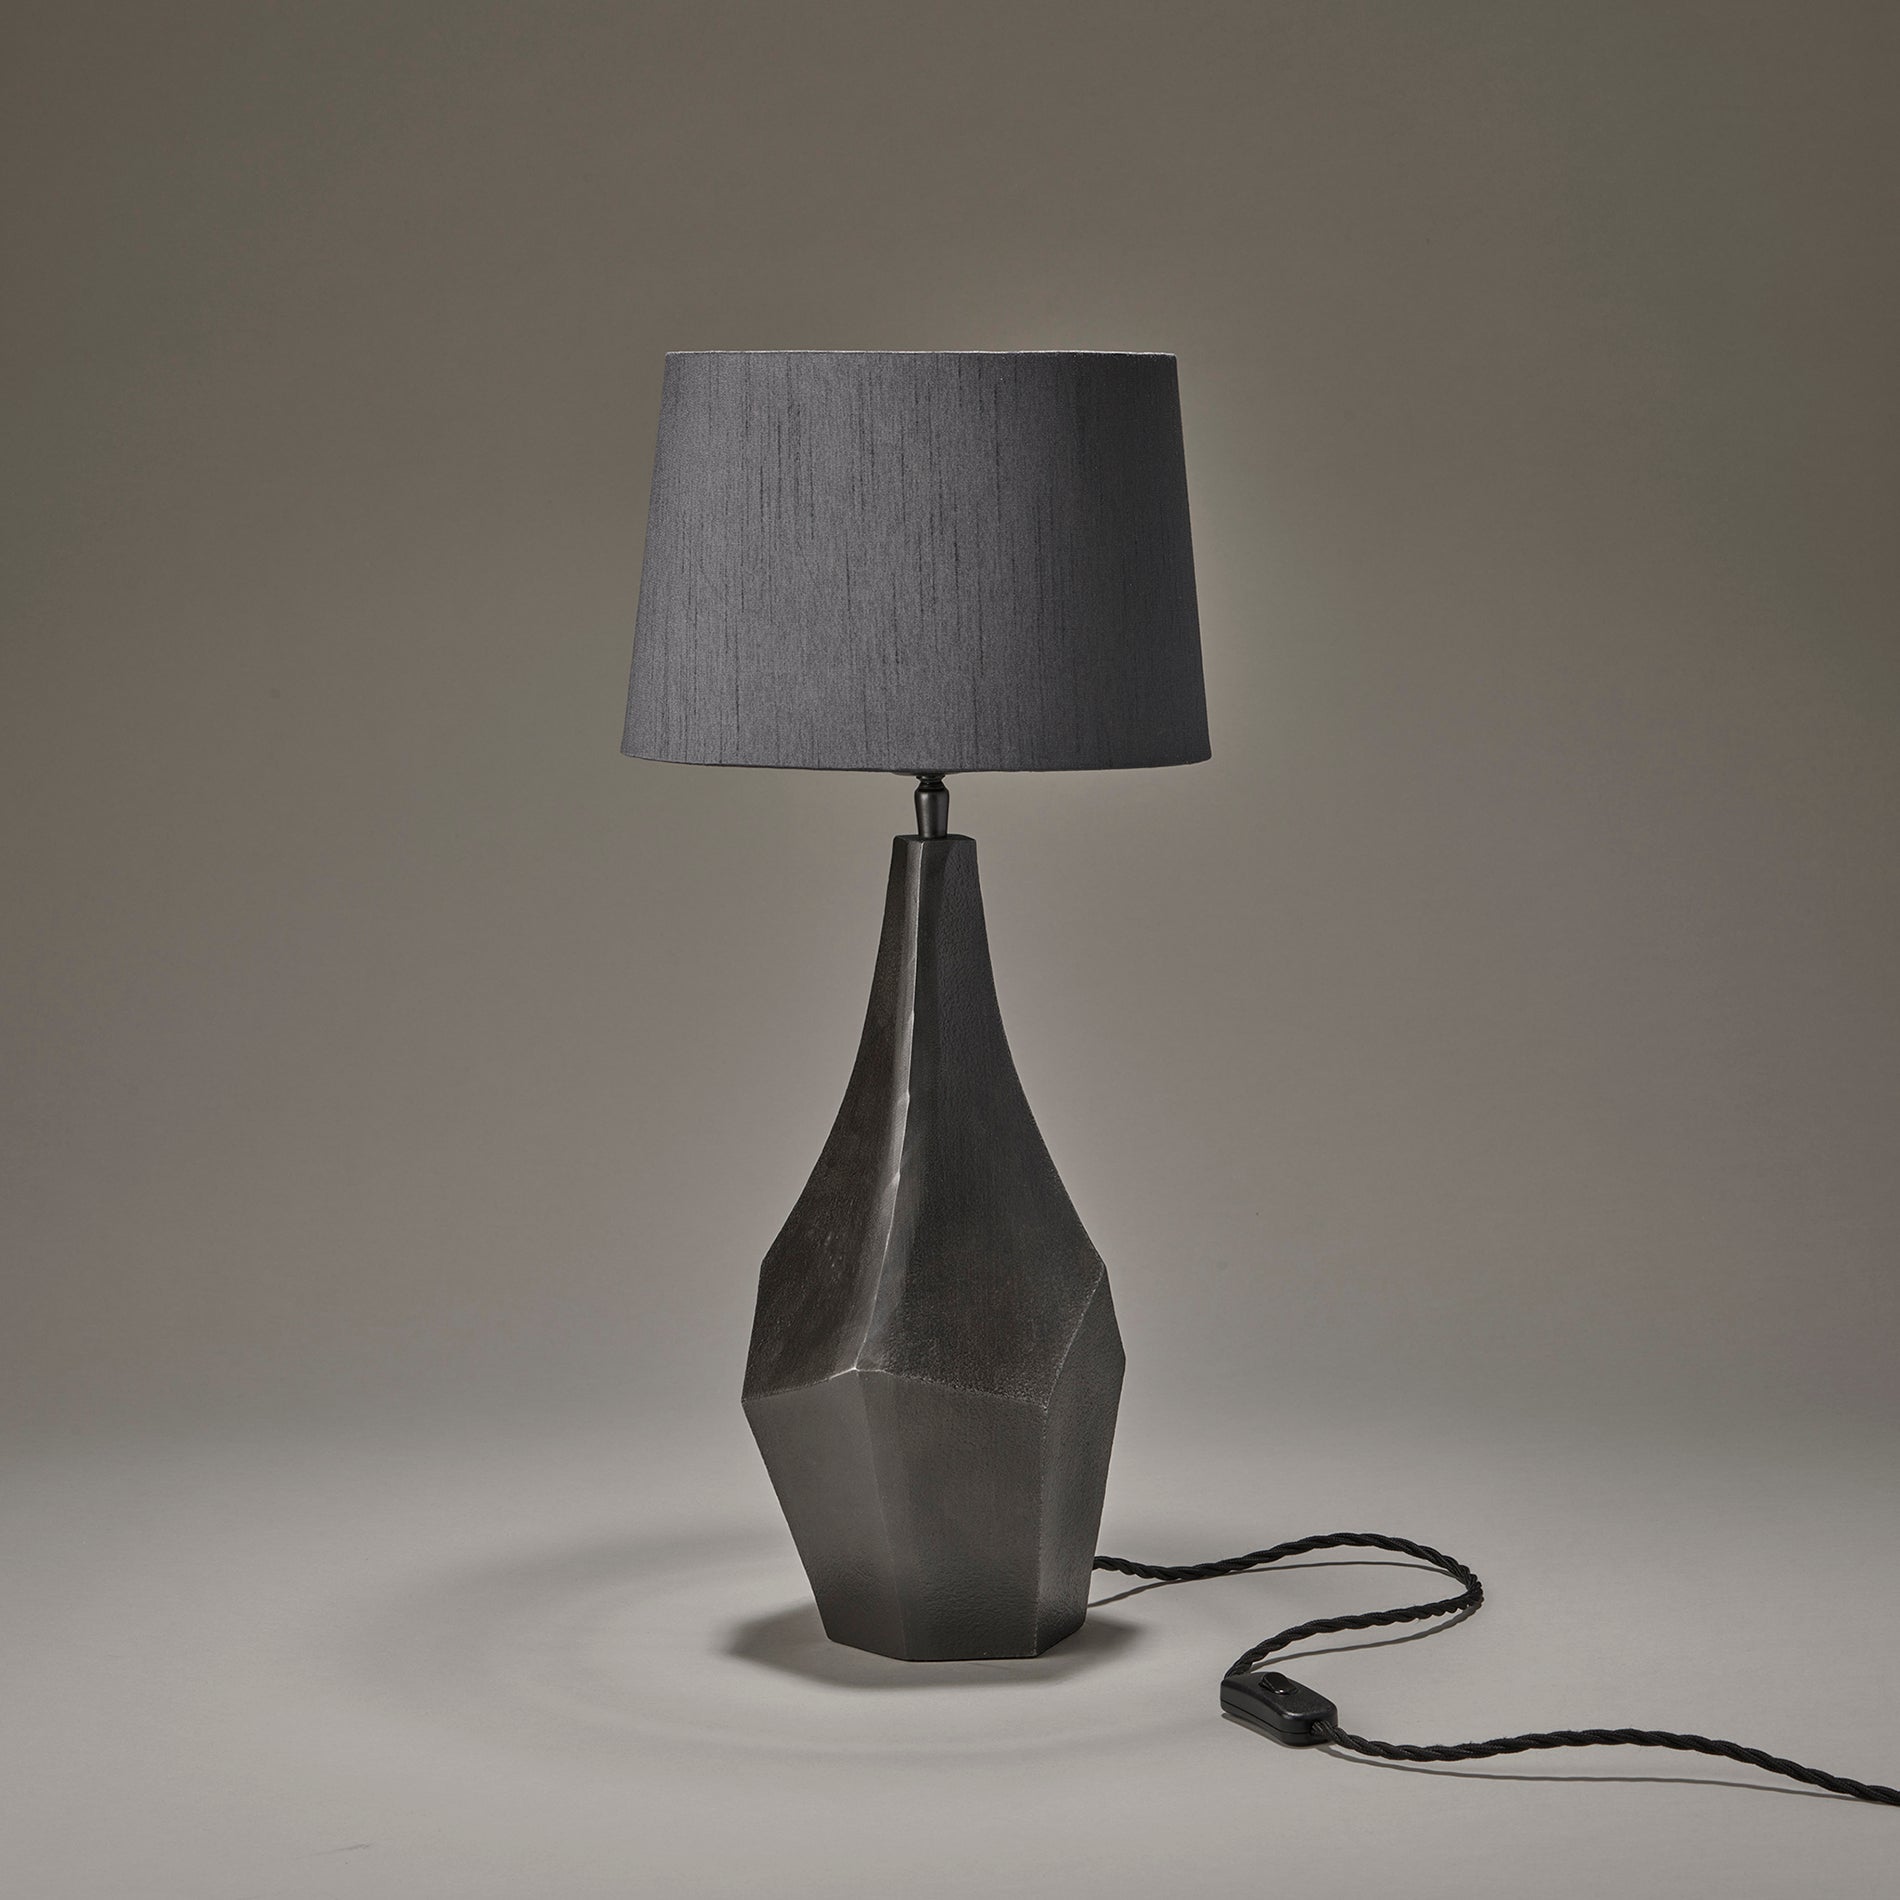 ornate prism table lamp in pewter with small empire lampshade in grey